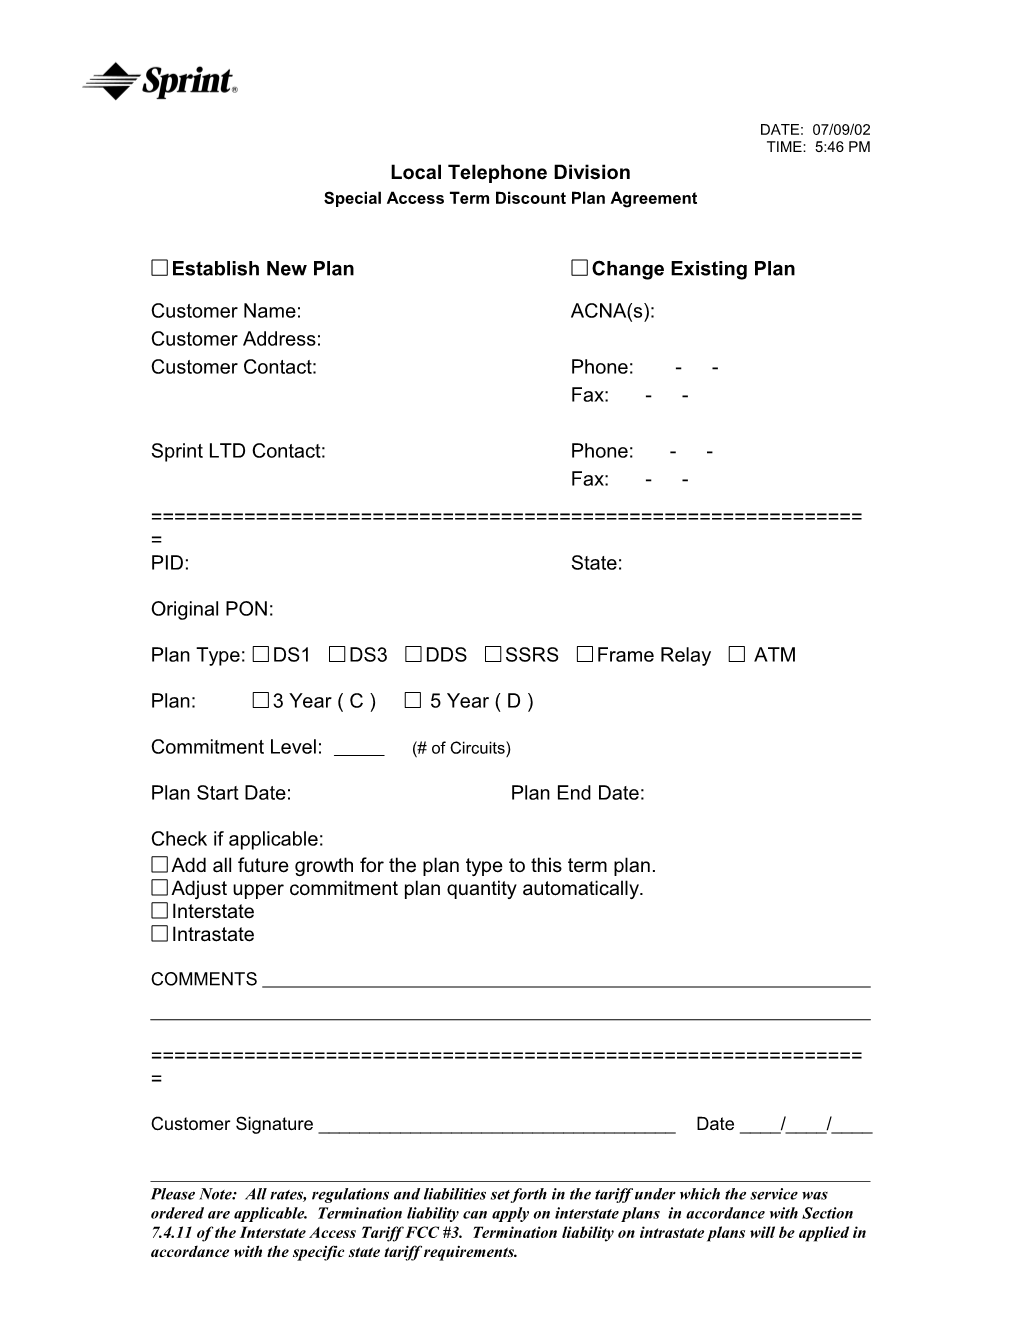 Term Discount Plan (TDP) Agreement Form - Special